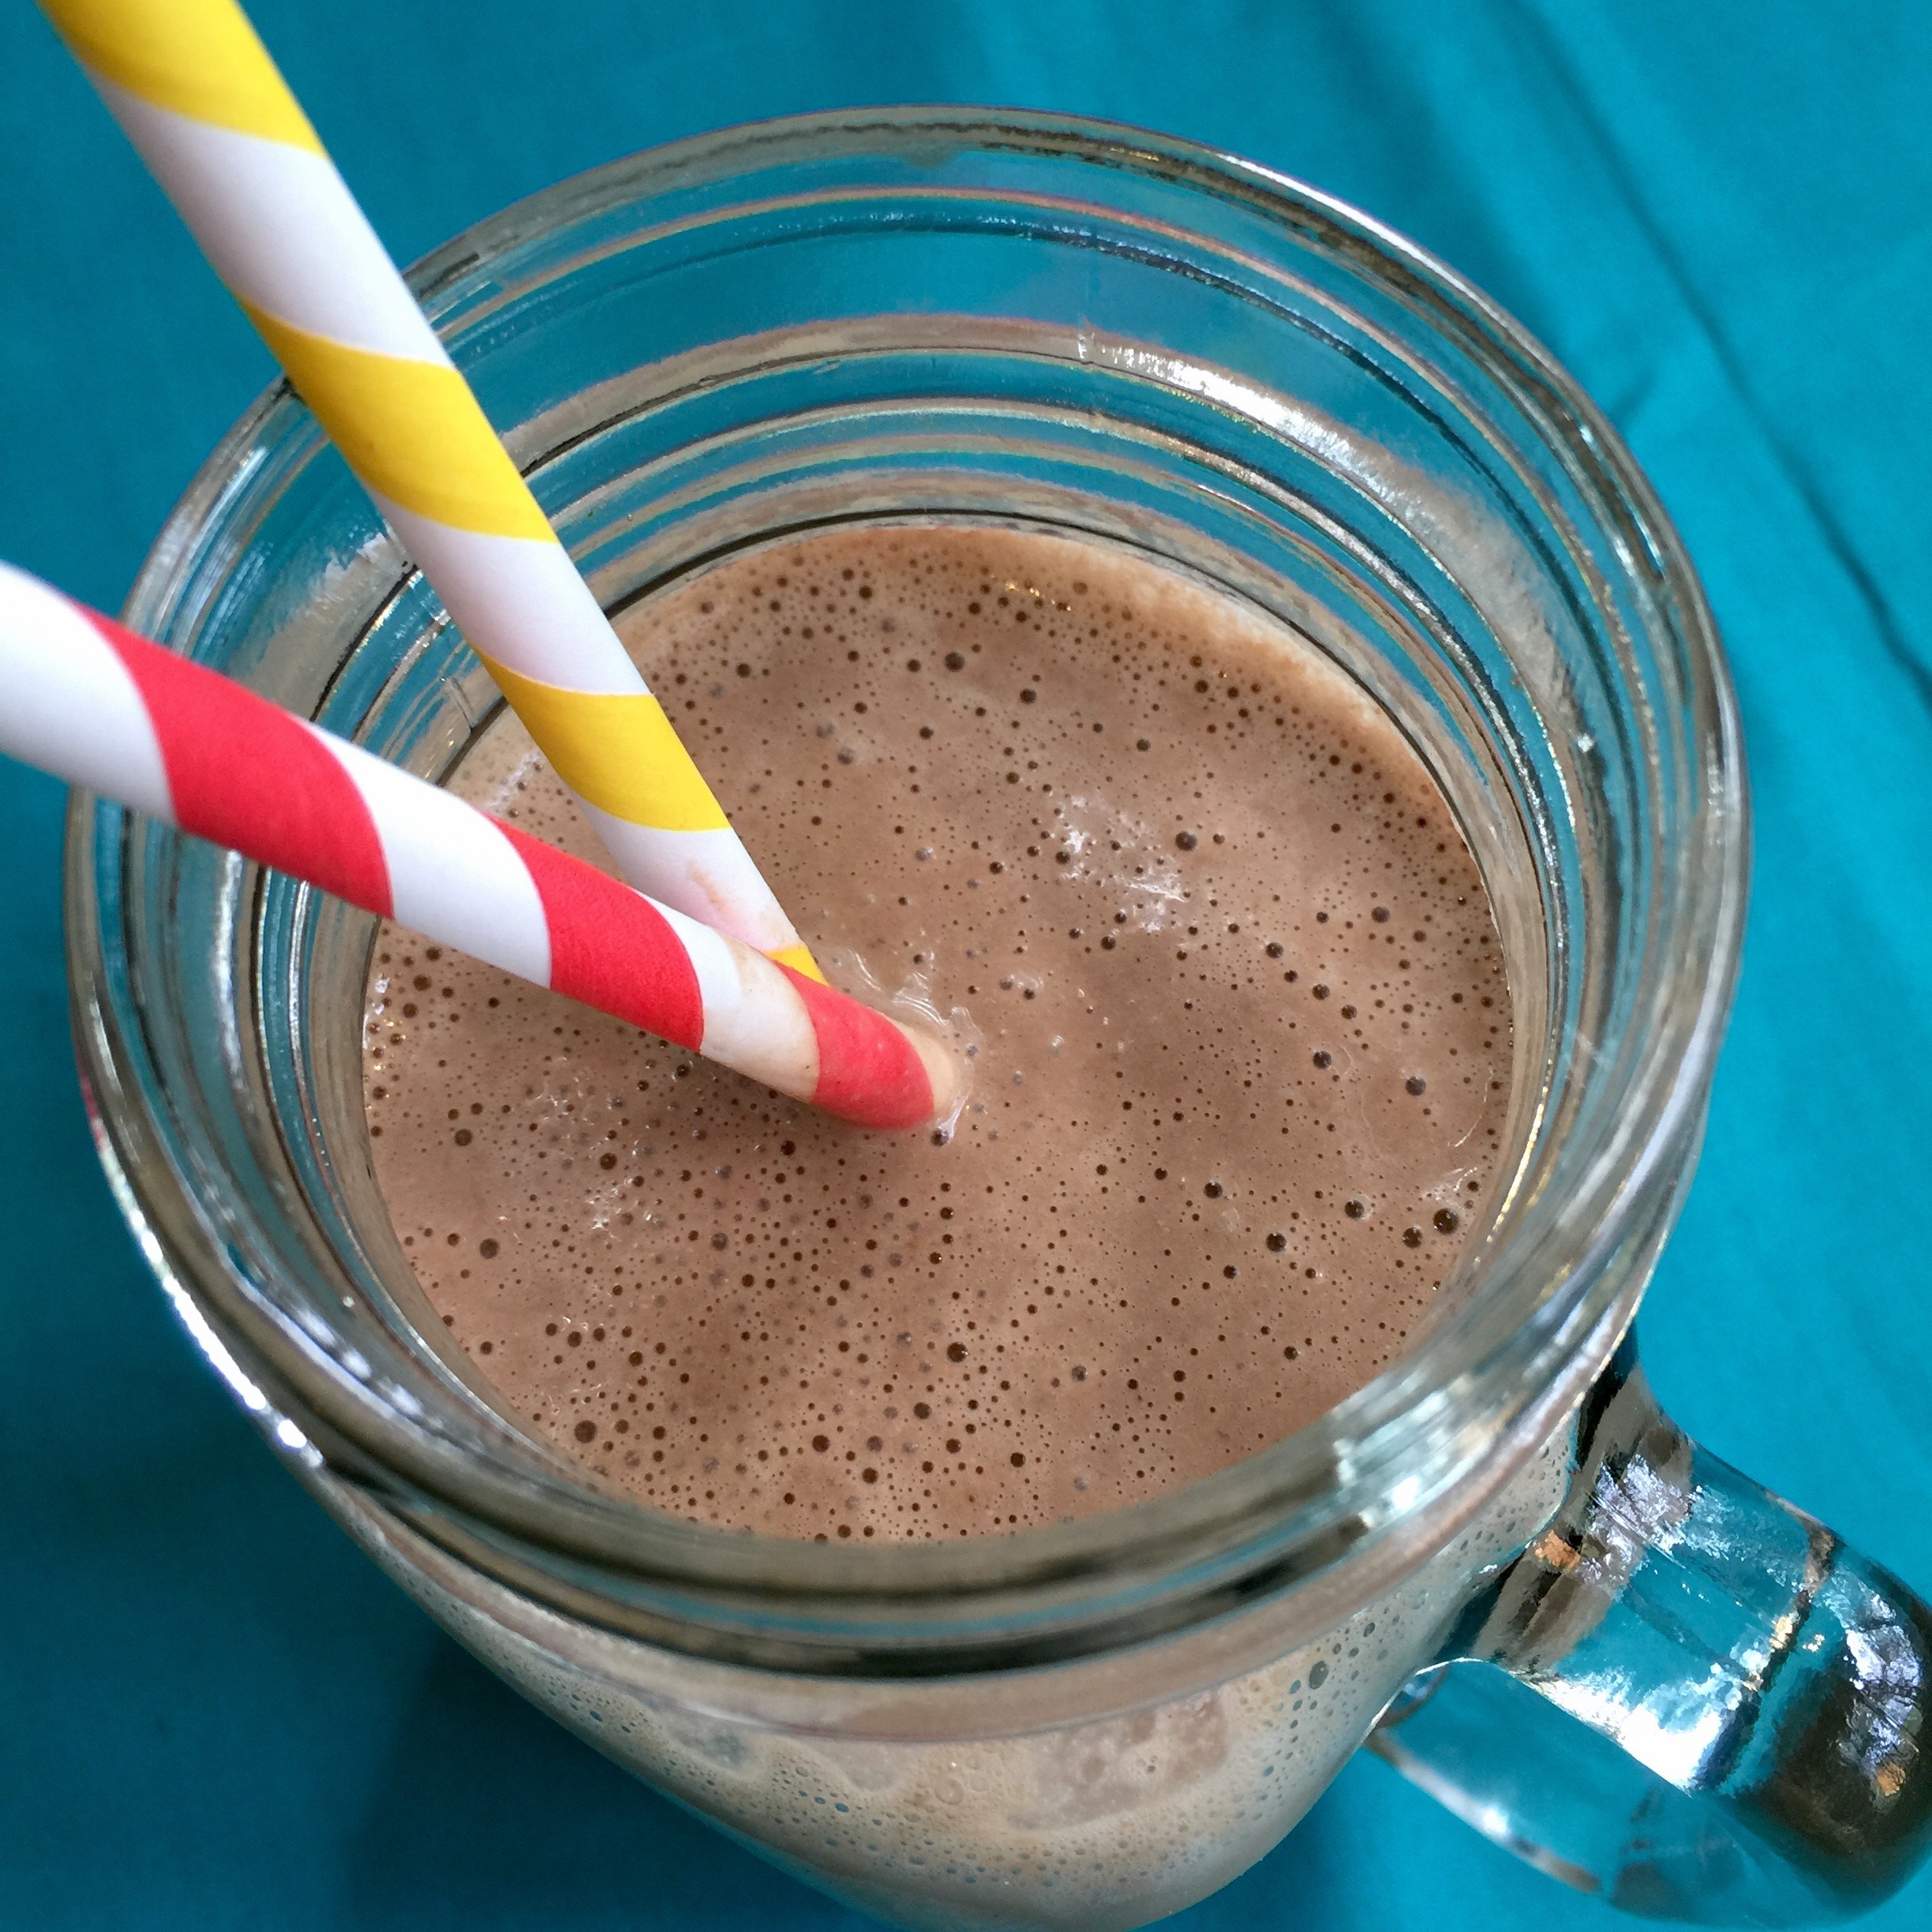 Chocolate peanut butter banana smoothie